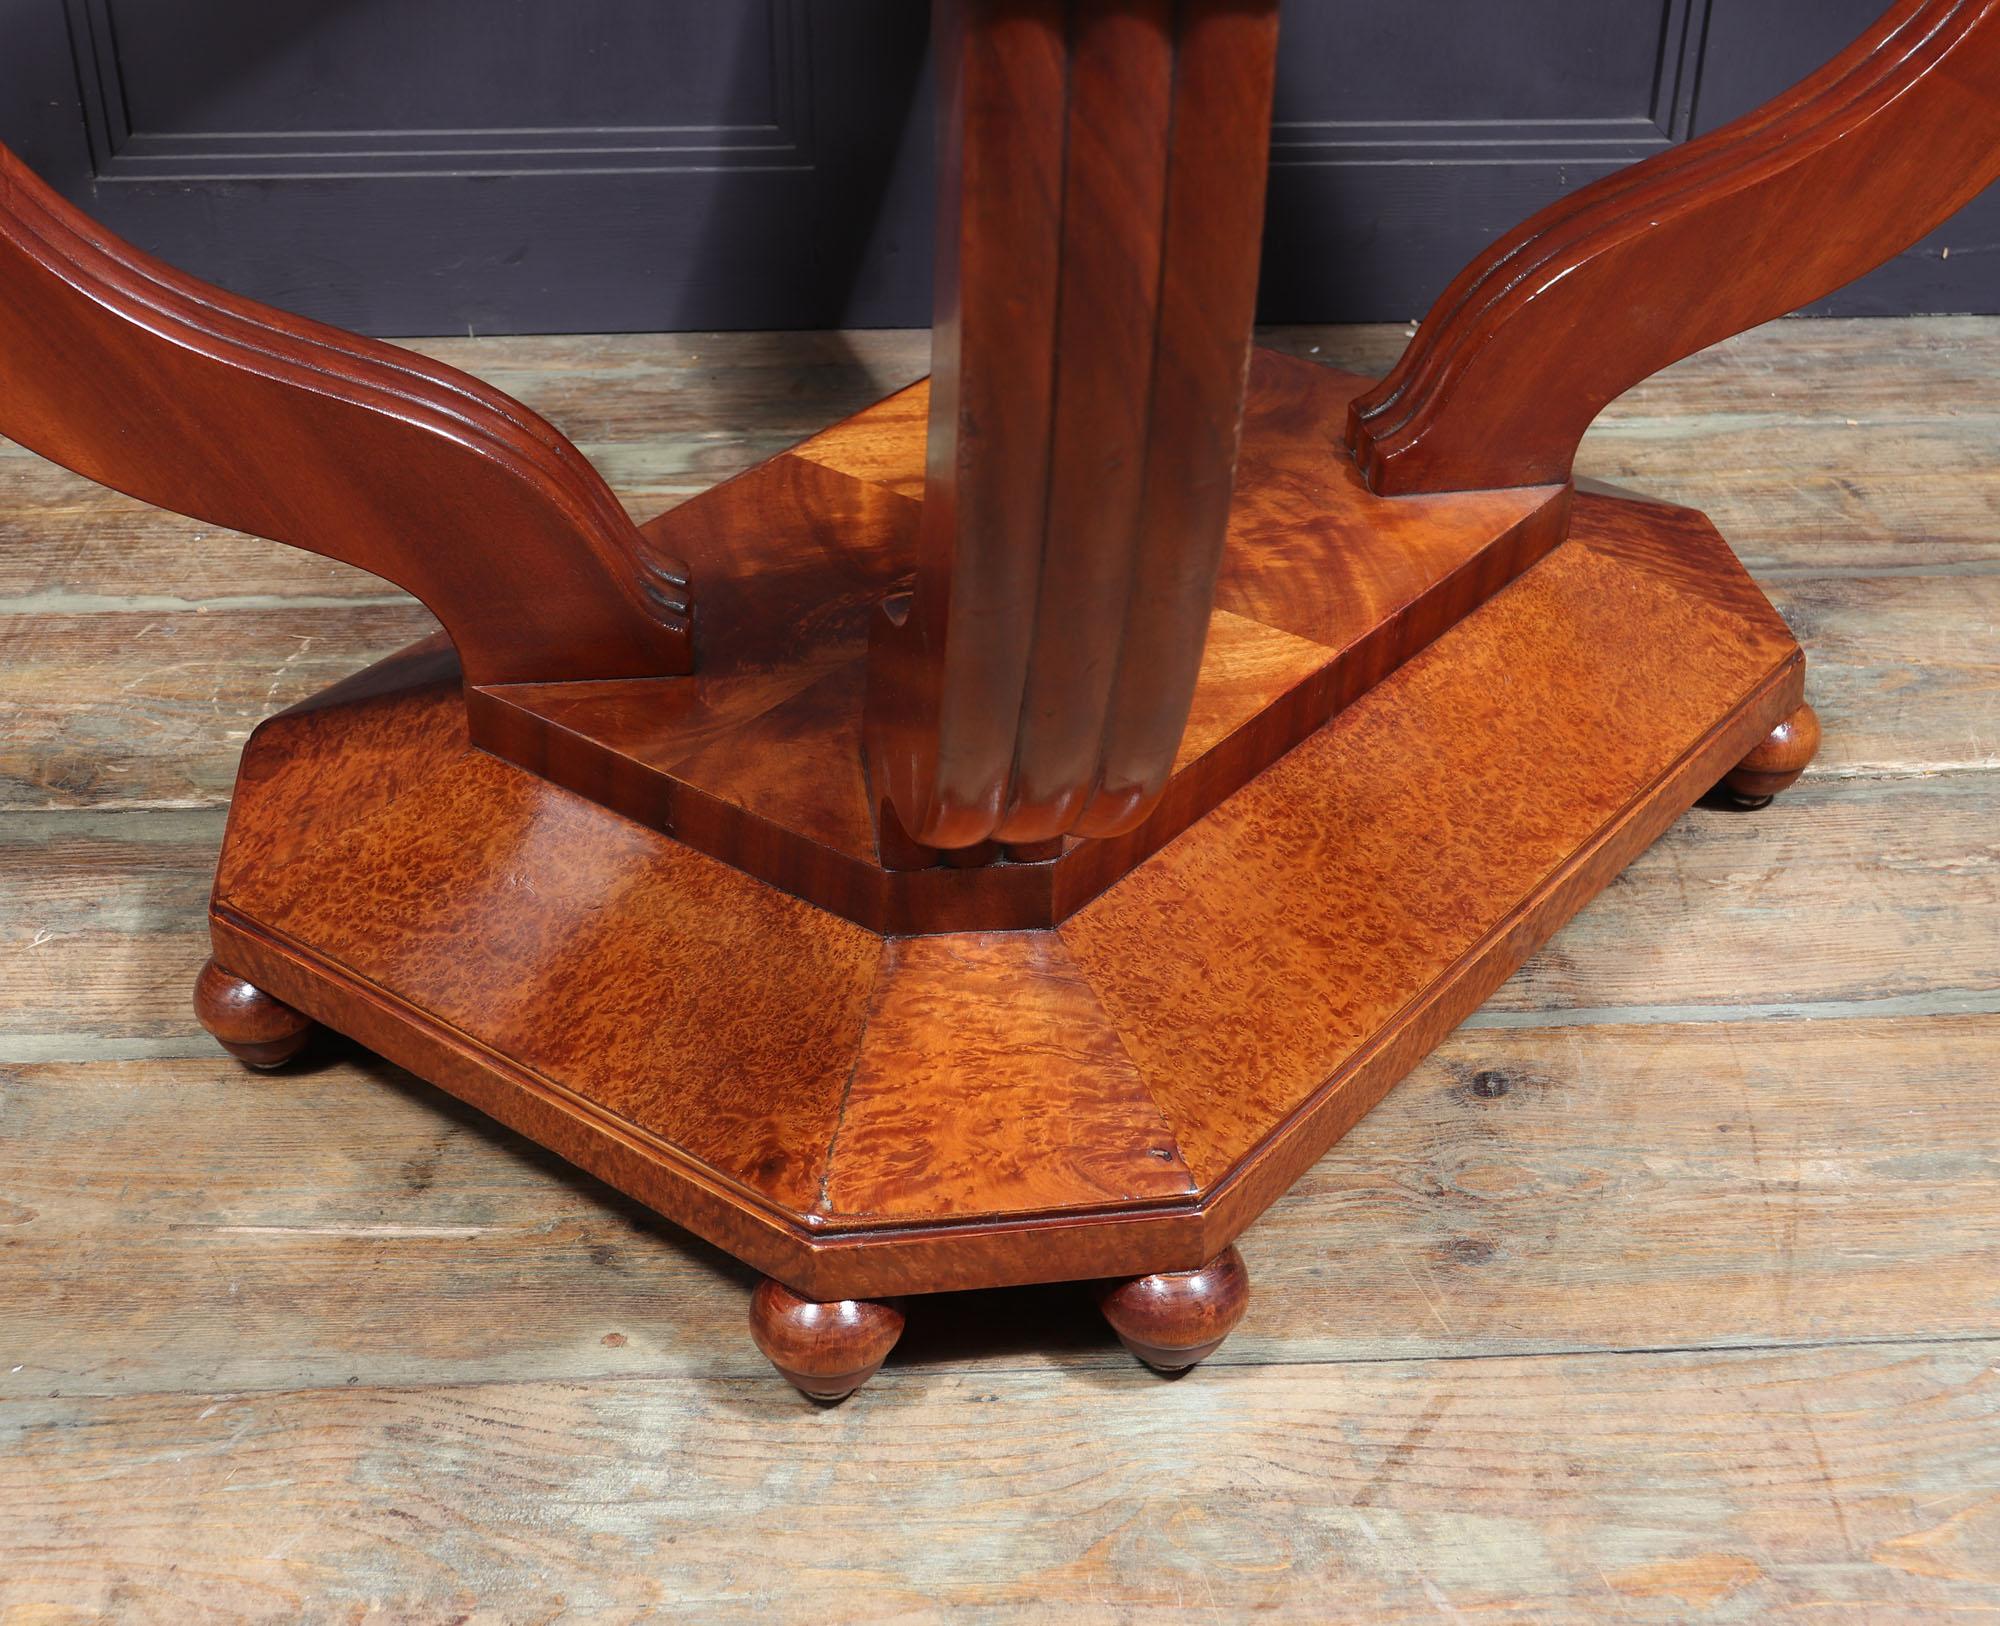 Art Deco centre table
A French Art Deco centre table having solid mahogany construction and stunning burr yew veneers. Produced in France in the 1920’s this table has slightly oblong octagonal form with four shaped uprights having large reeded